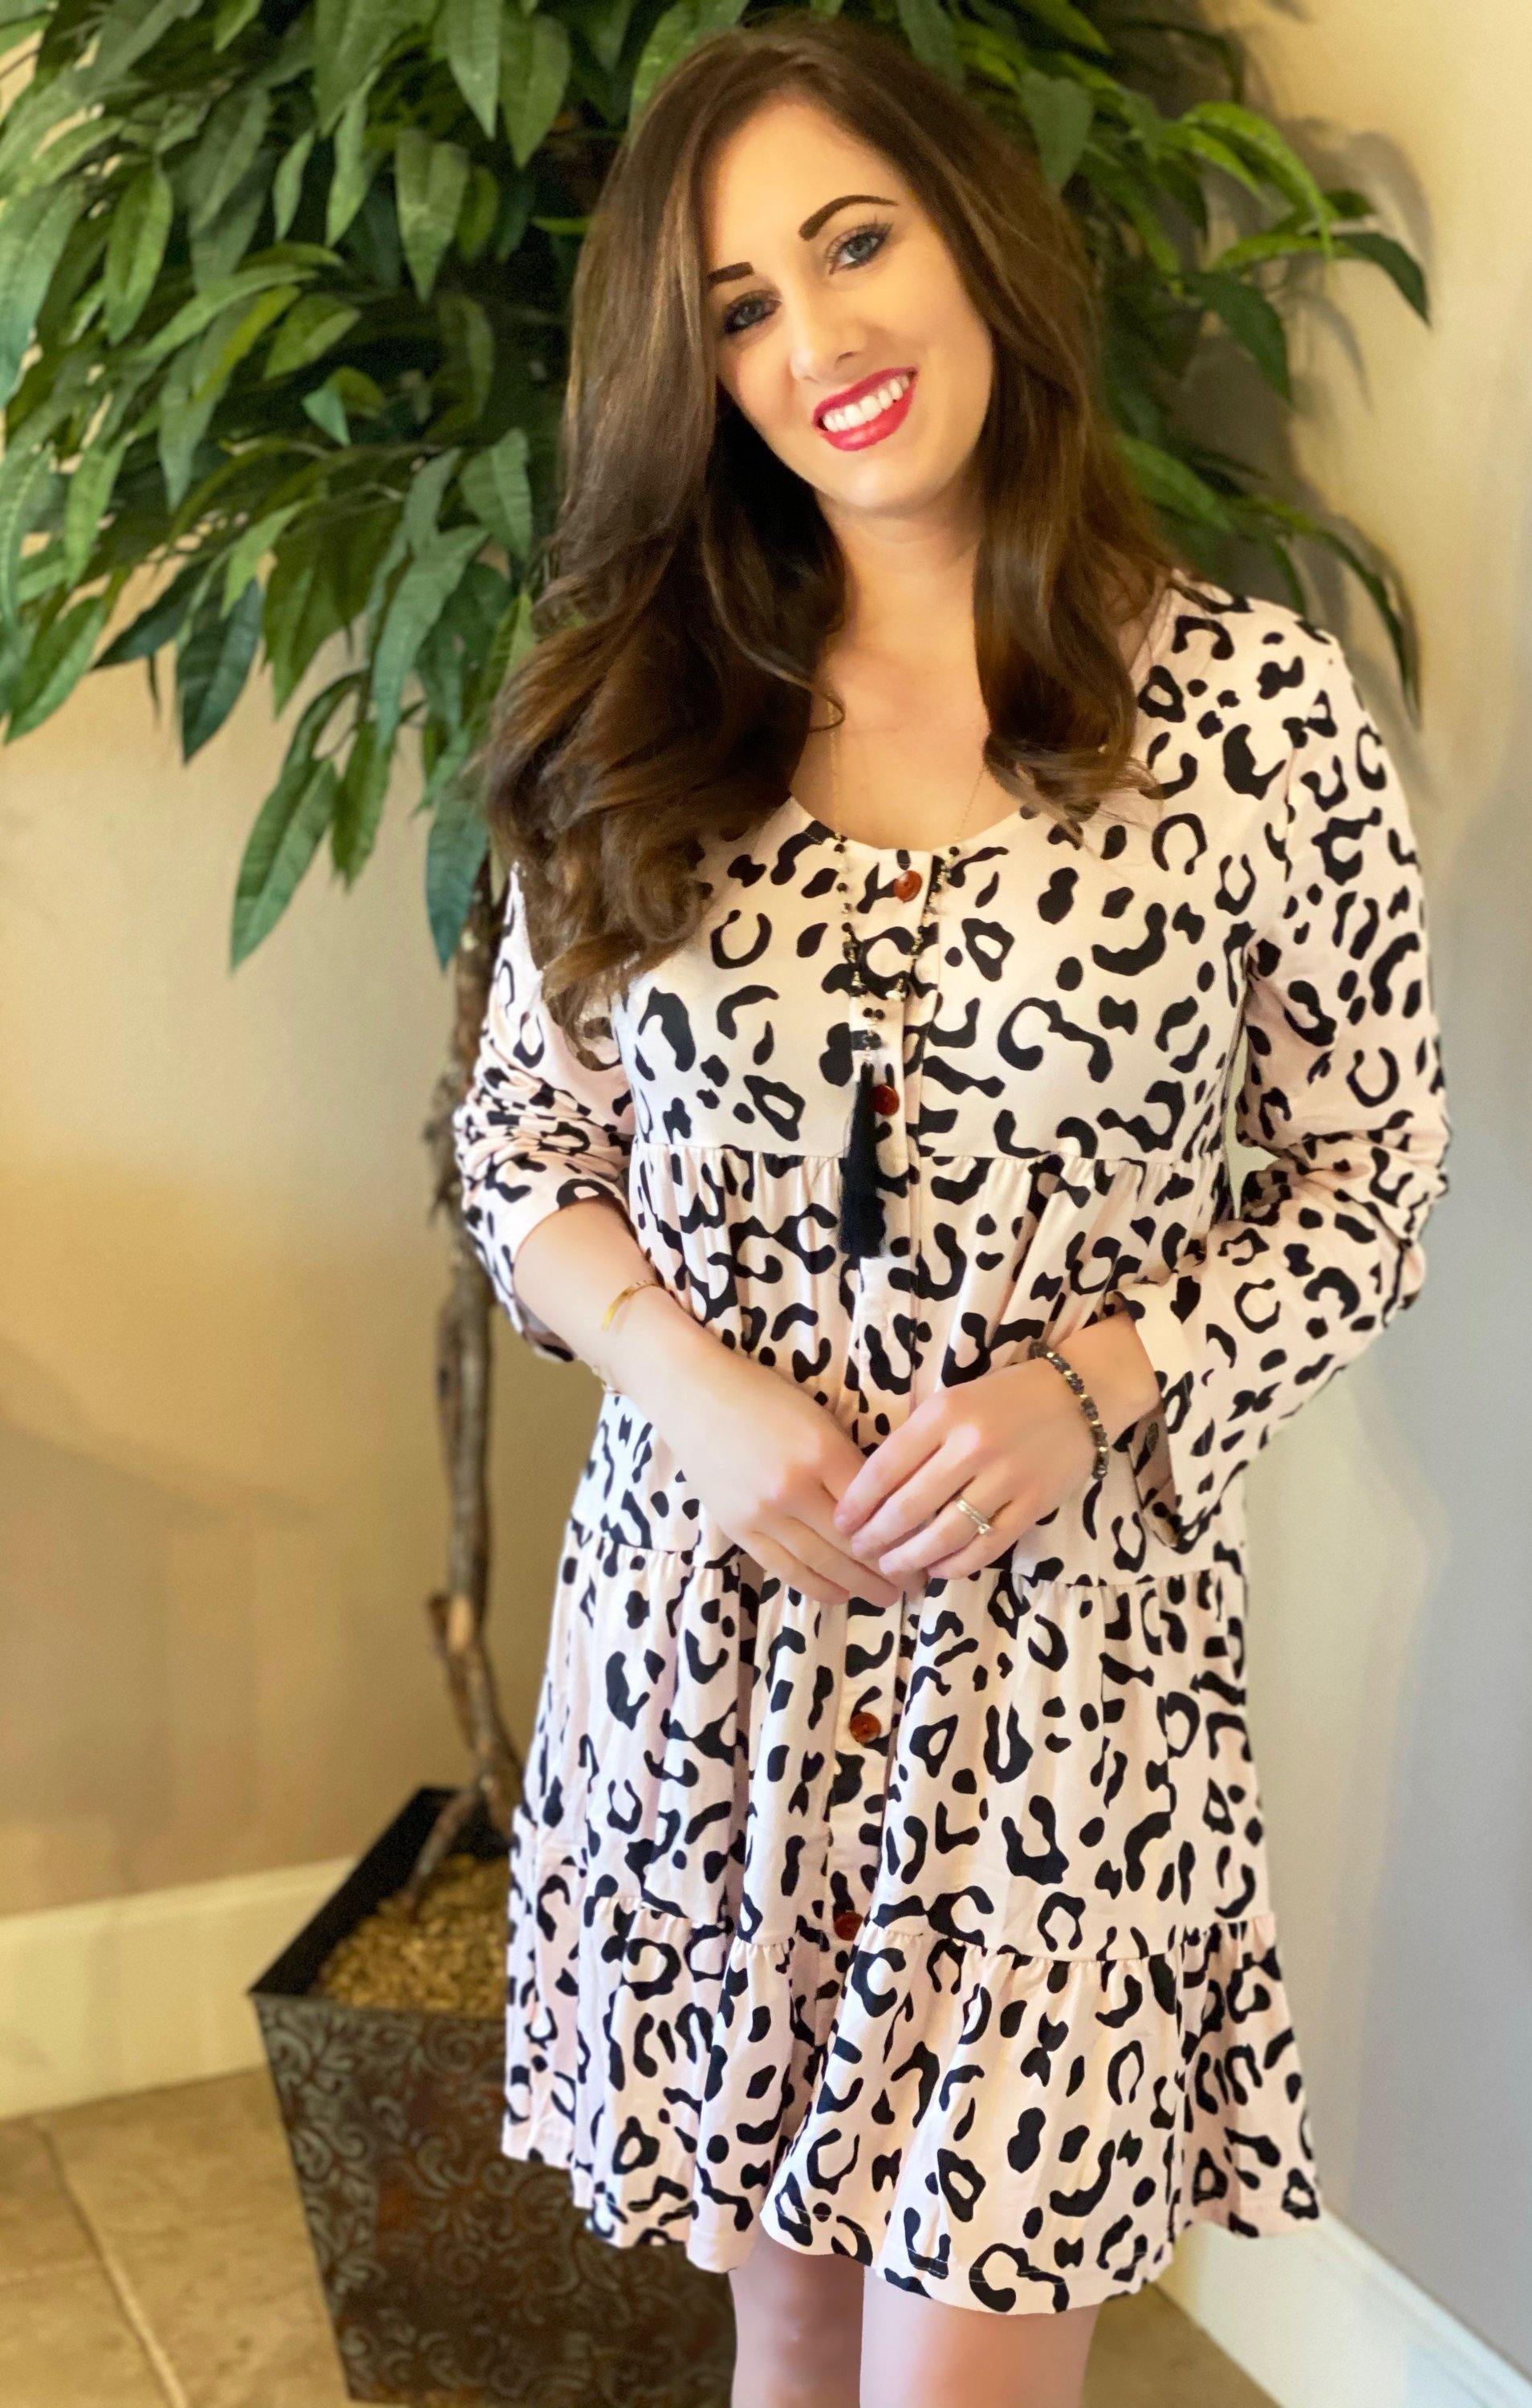 Blush leopard dress - For you and all